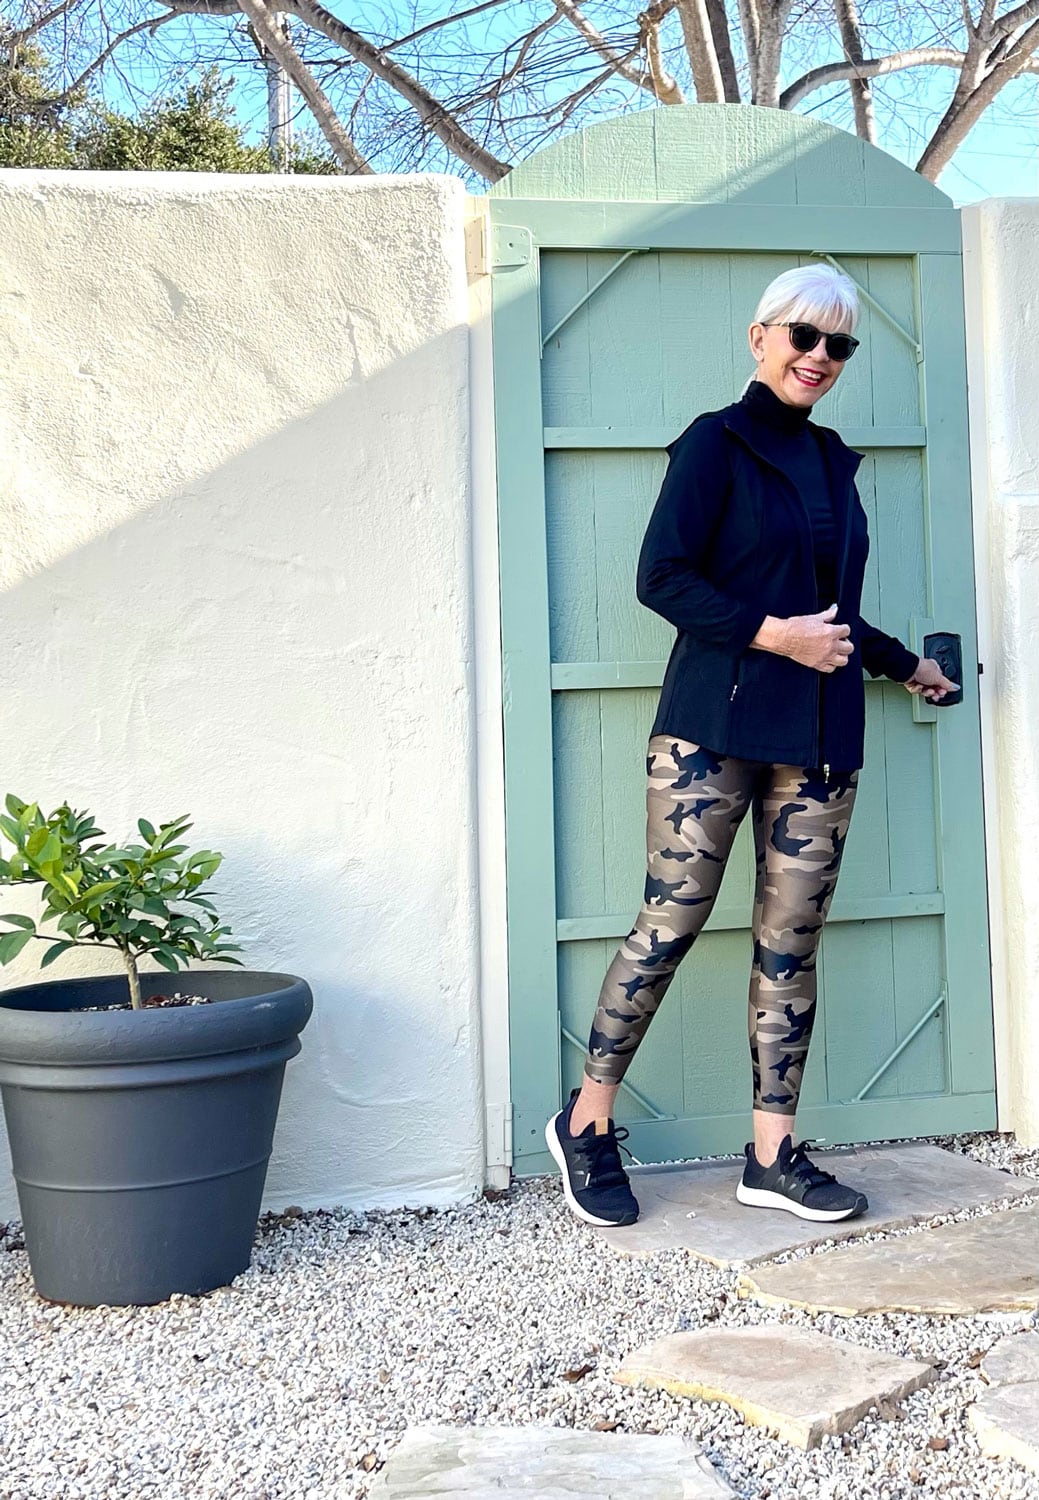 Over 50 Fashion Blogger Cindy Hattersley in J Jill Performance Zip Hoodie and BR  Koral High Rise Legging